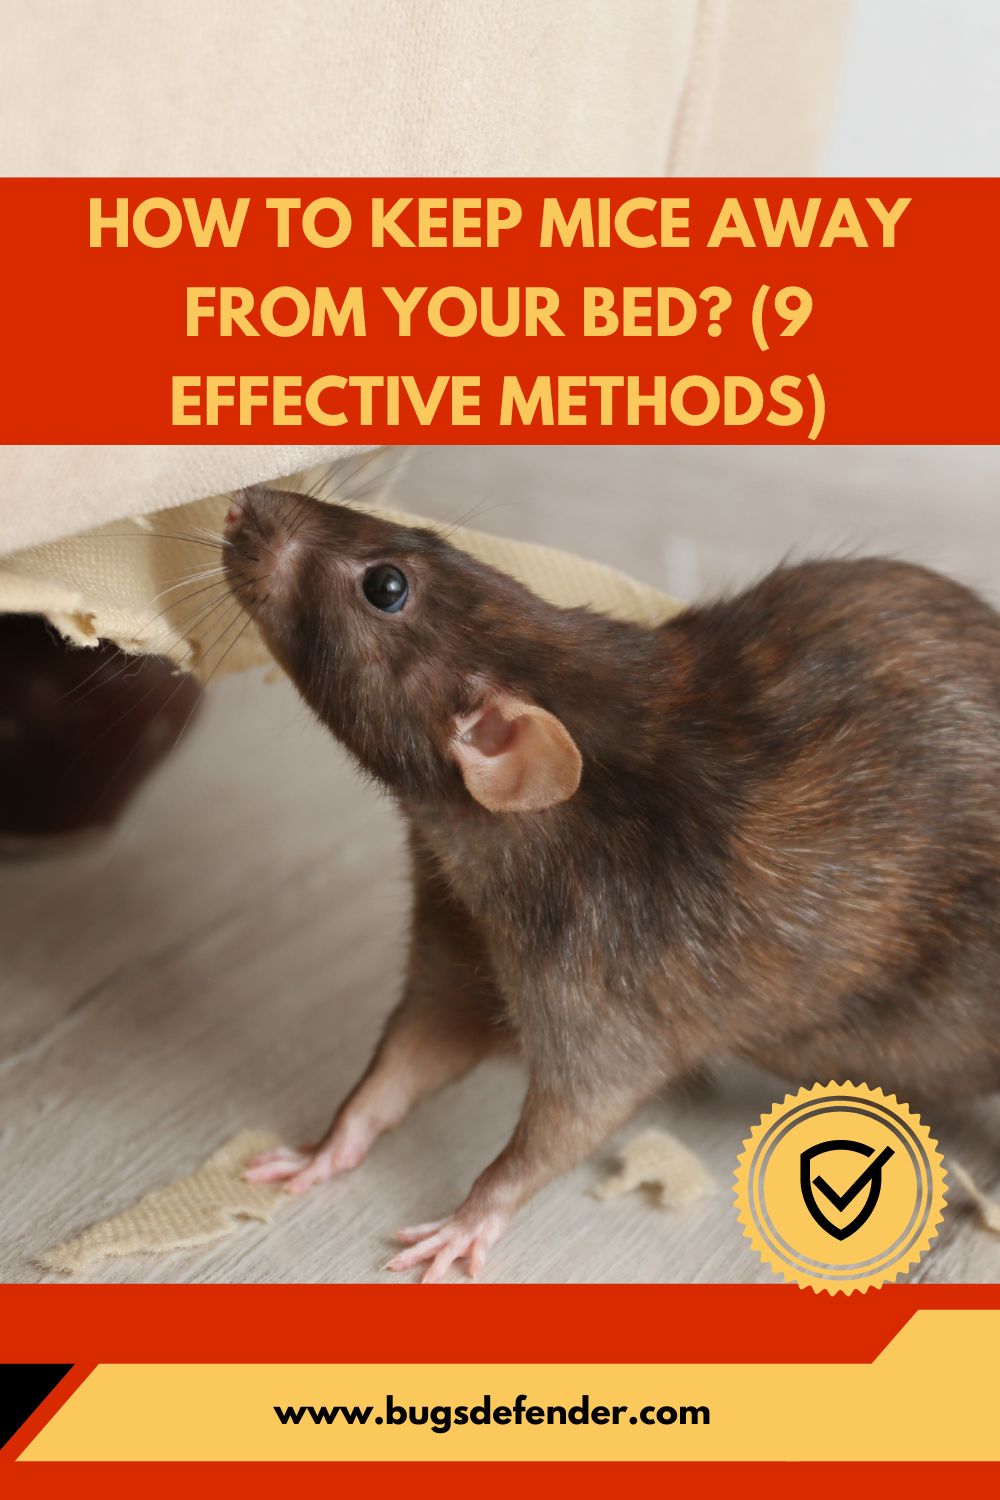 How to Keep Mice Away from Your Bed? (9 Effective Methods) pin2